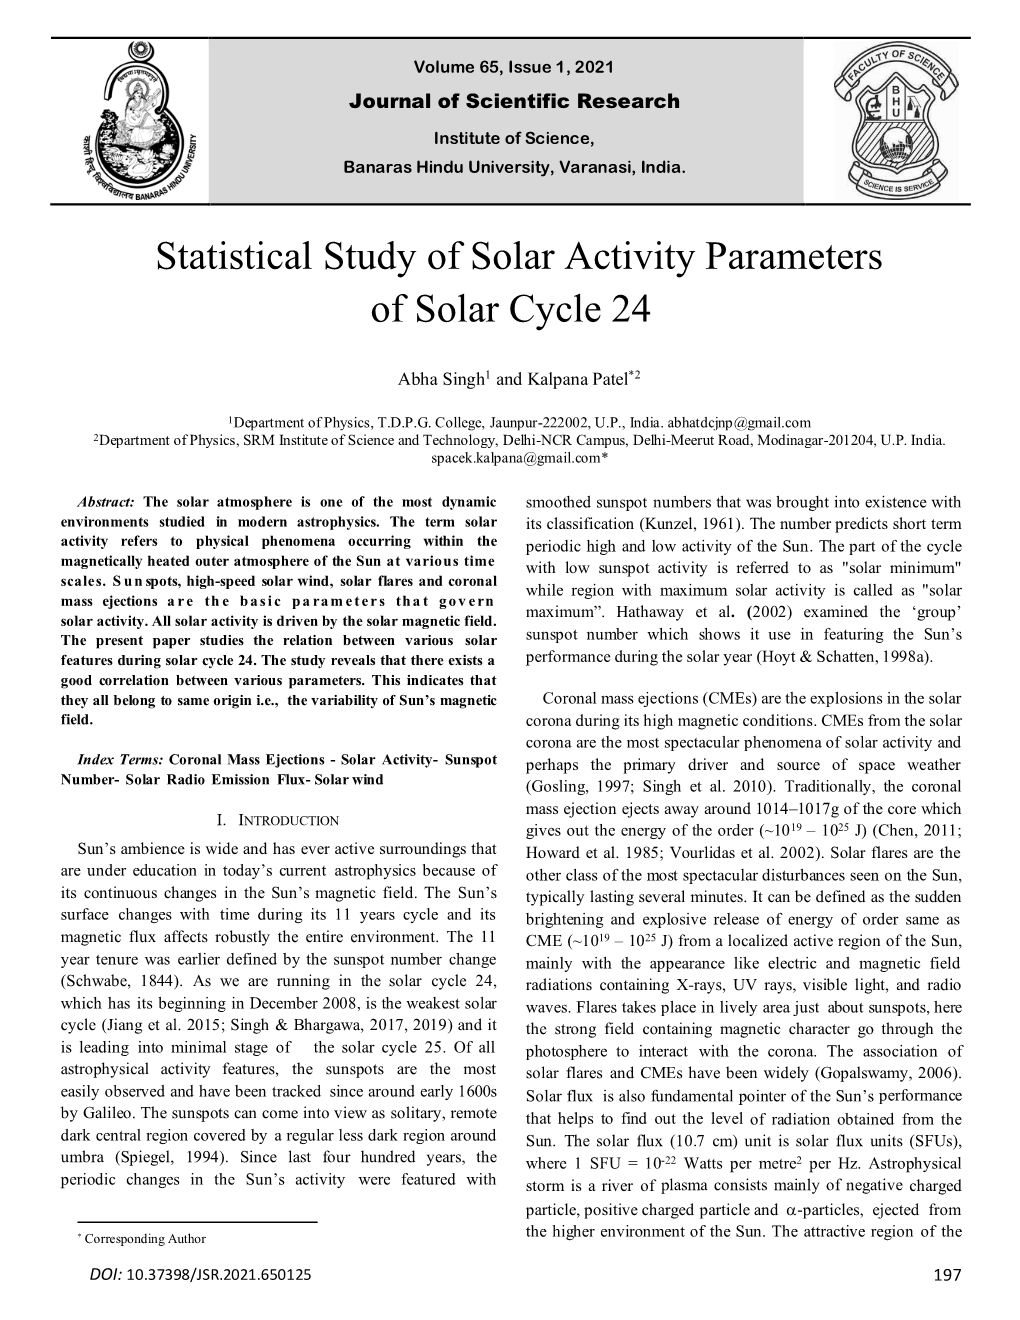 Statistical Study of Solar Activity Parameters of Solar Cycle 24